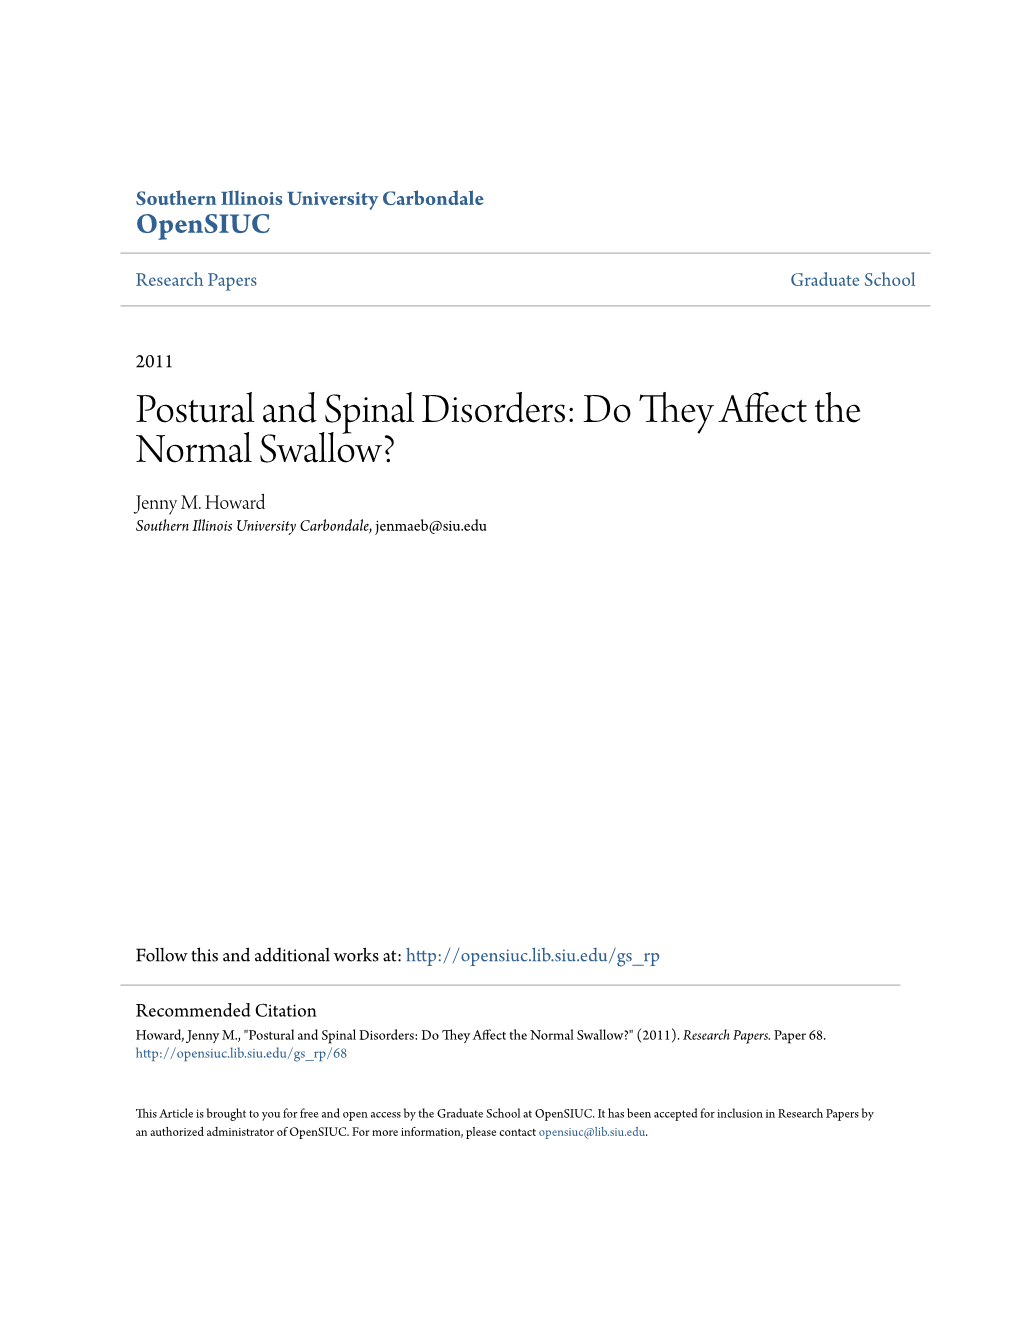 Postural and Spinal Disorders: Do They Affect the Normal Swallow? Jenny M